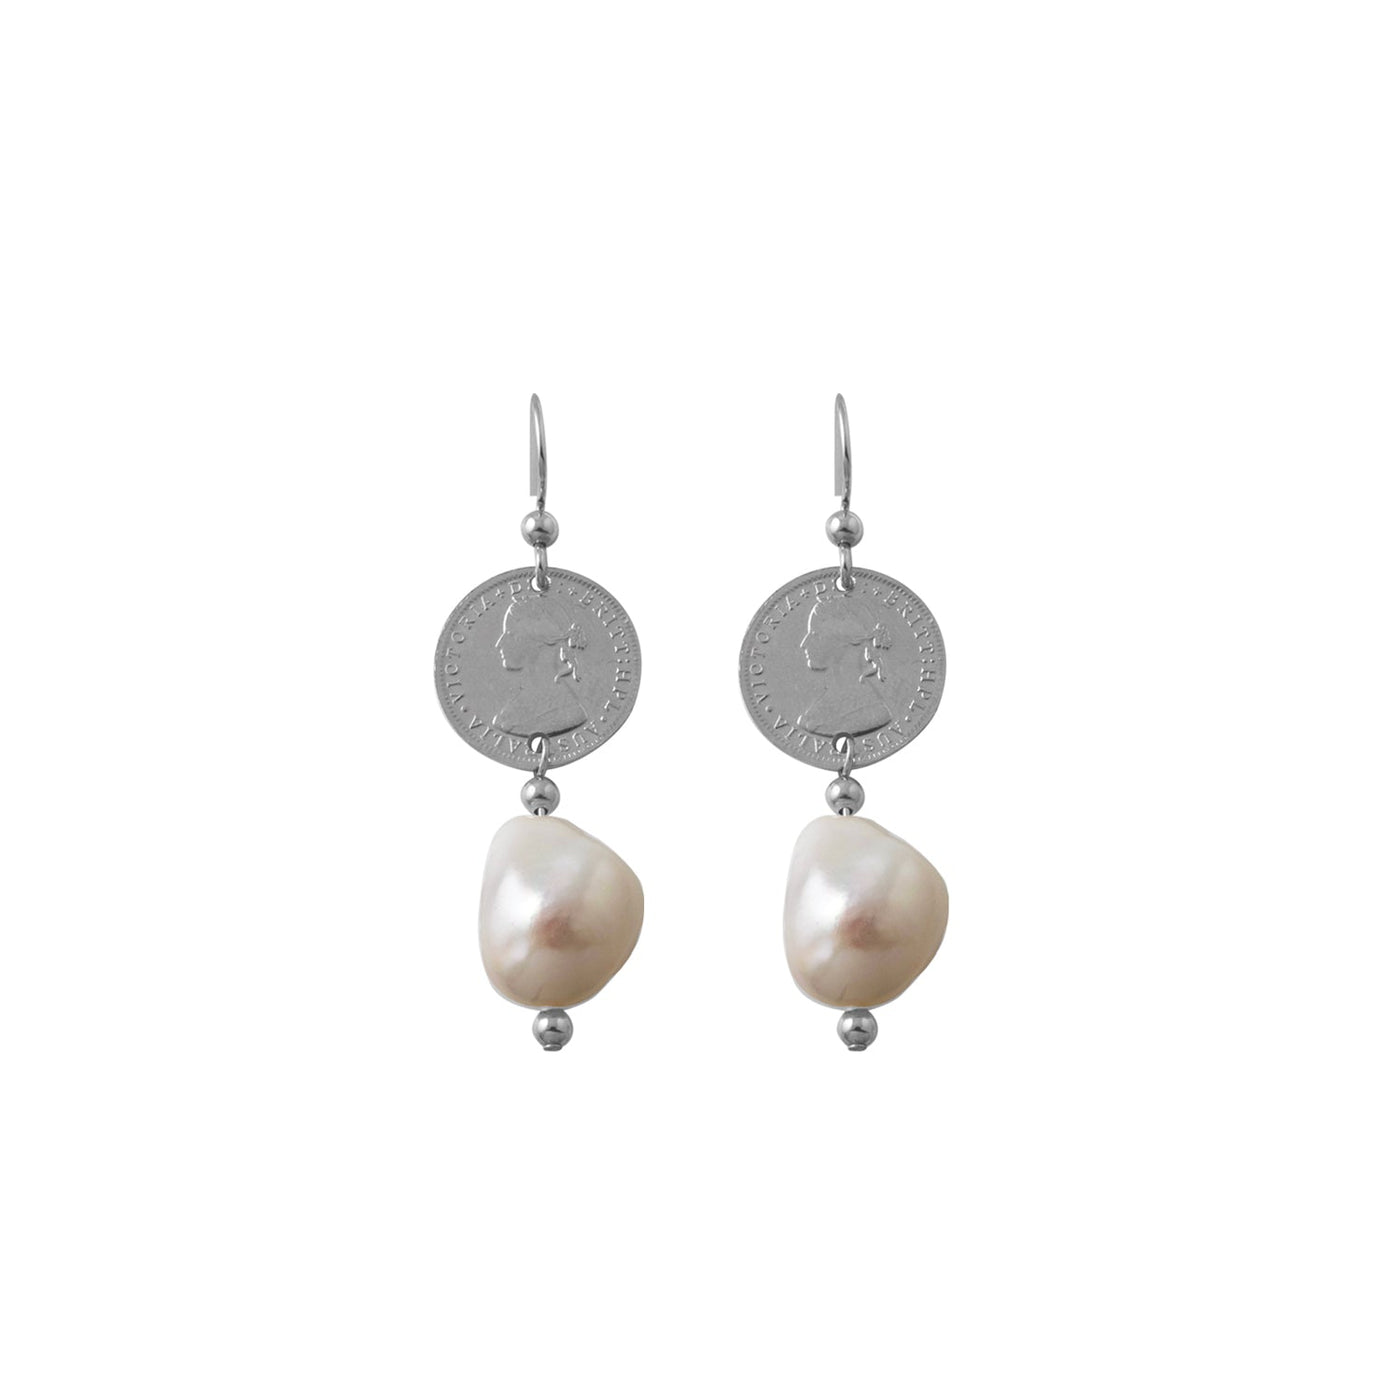 Von Treskow Coin Earrings with Baroque Pearl